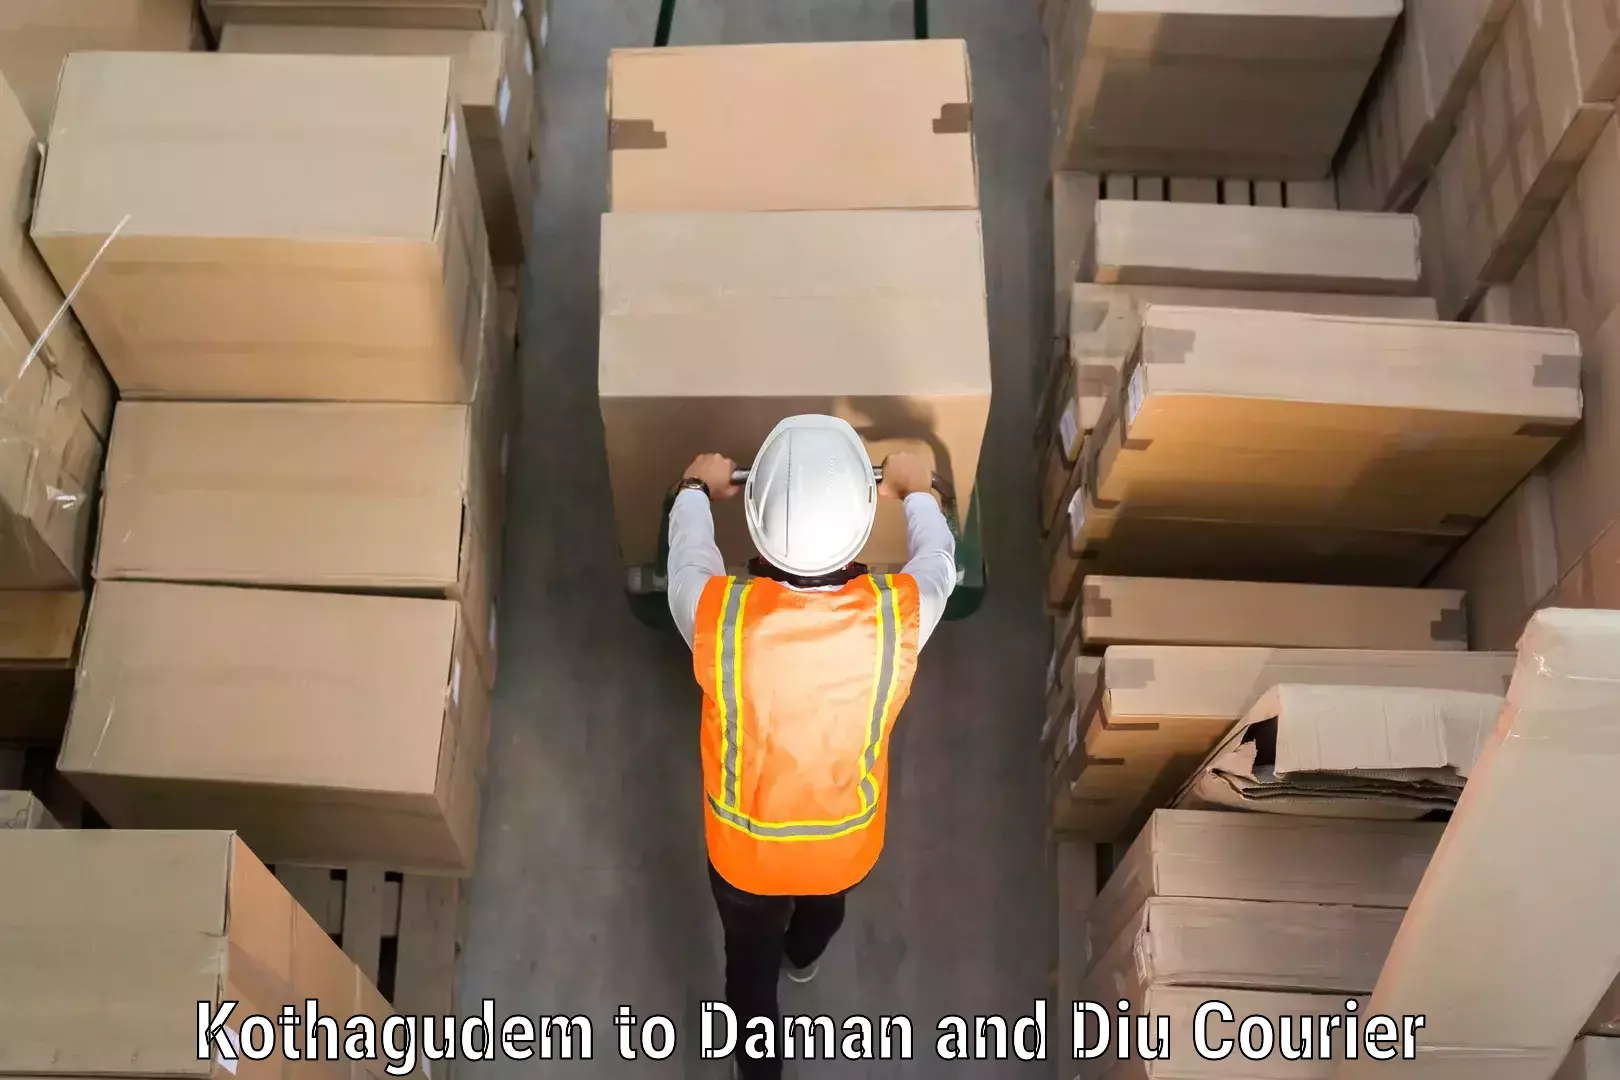 Hassle-free luggage shipping Kothagudem to Daman and Diu